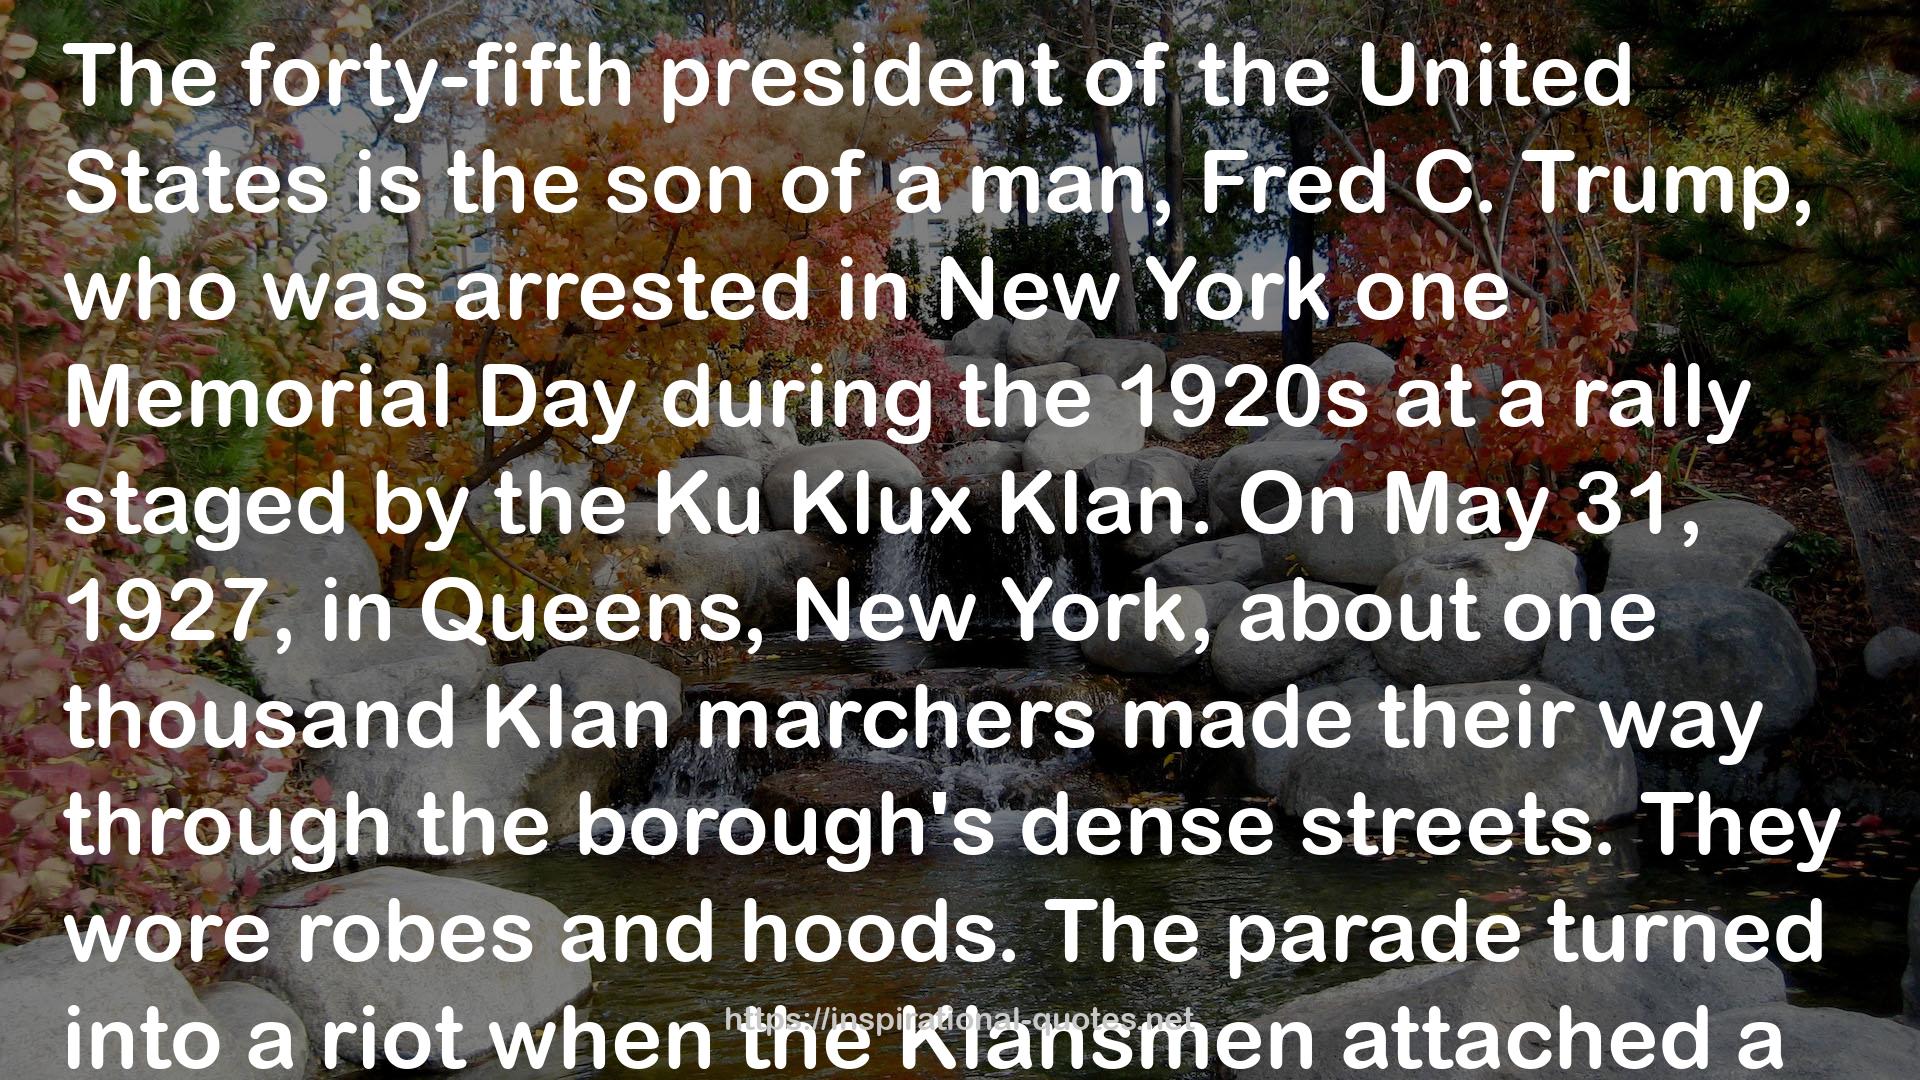 Life of a Klansman: A Family History in White Supremacy QUOTES